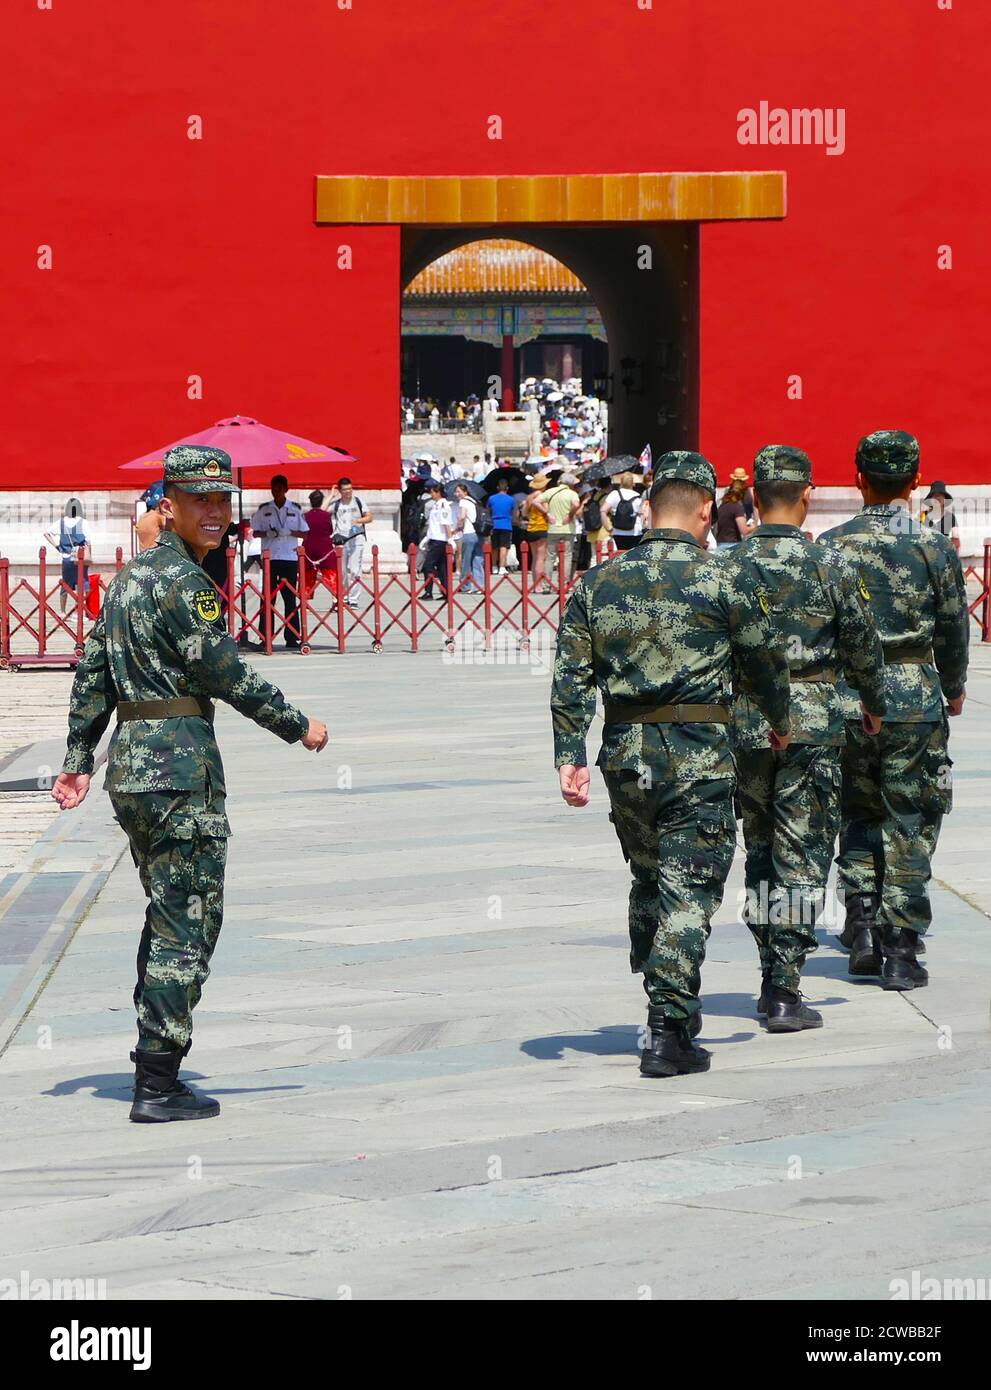 Soldiers of the Chinese Army in Beijing, 2019. With 2.3 million active troops, the People's Liberation Army (PLA) is the largest standing military force in the world Stock Photo